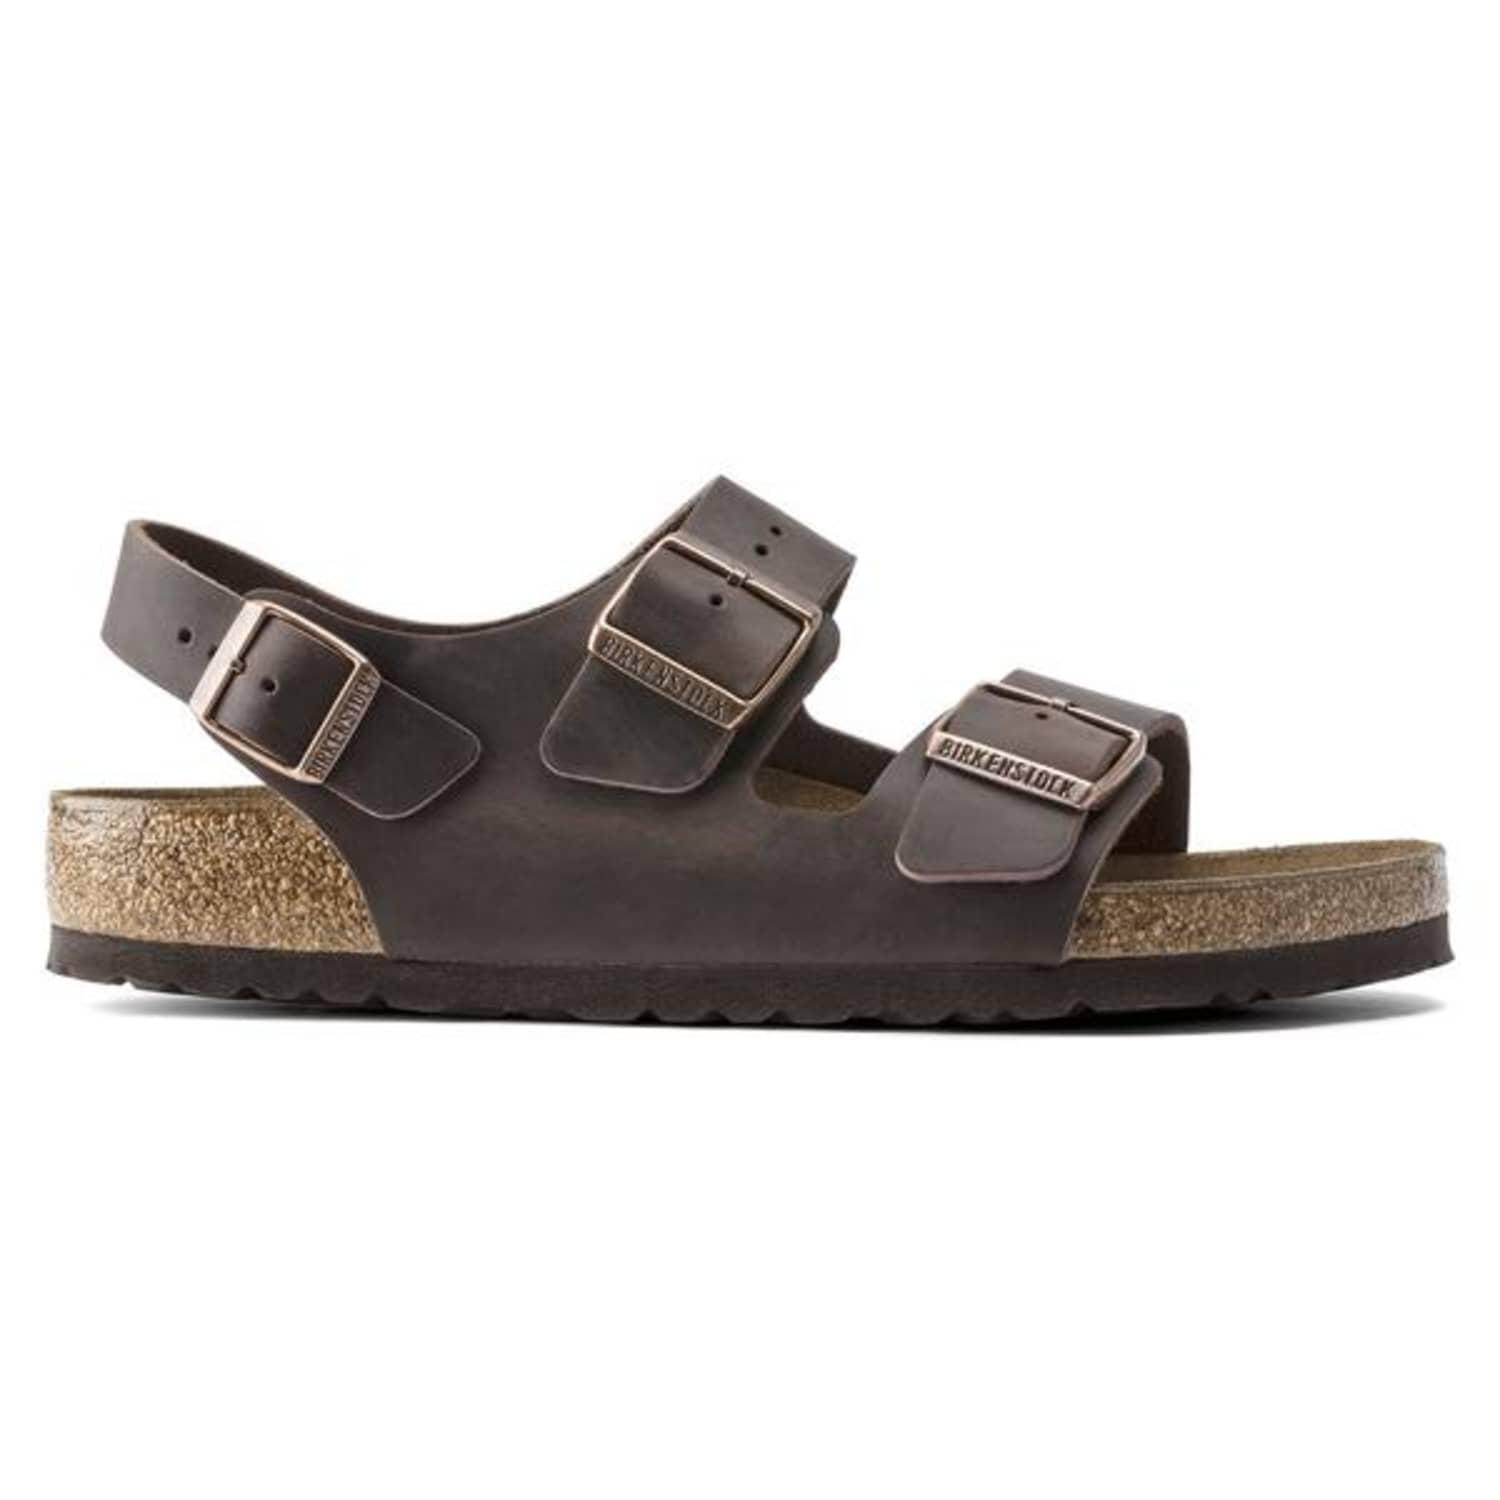 Birkenstock Leather Milano Bs Sandals in Brown for Men - Save 25% - Lyst